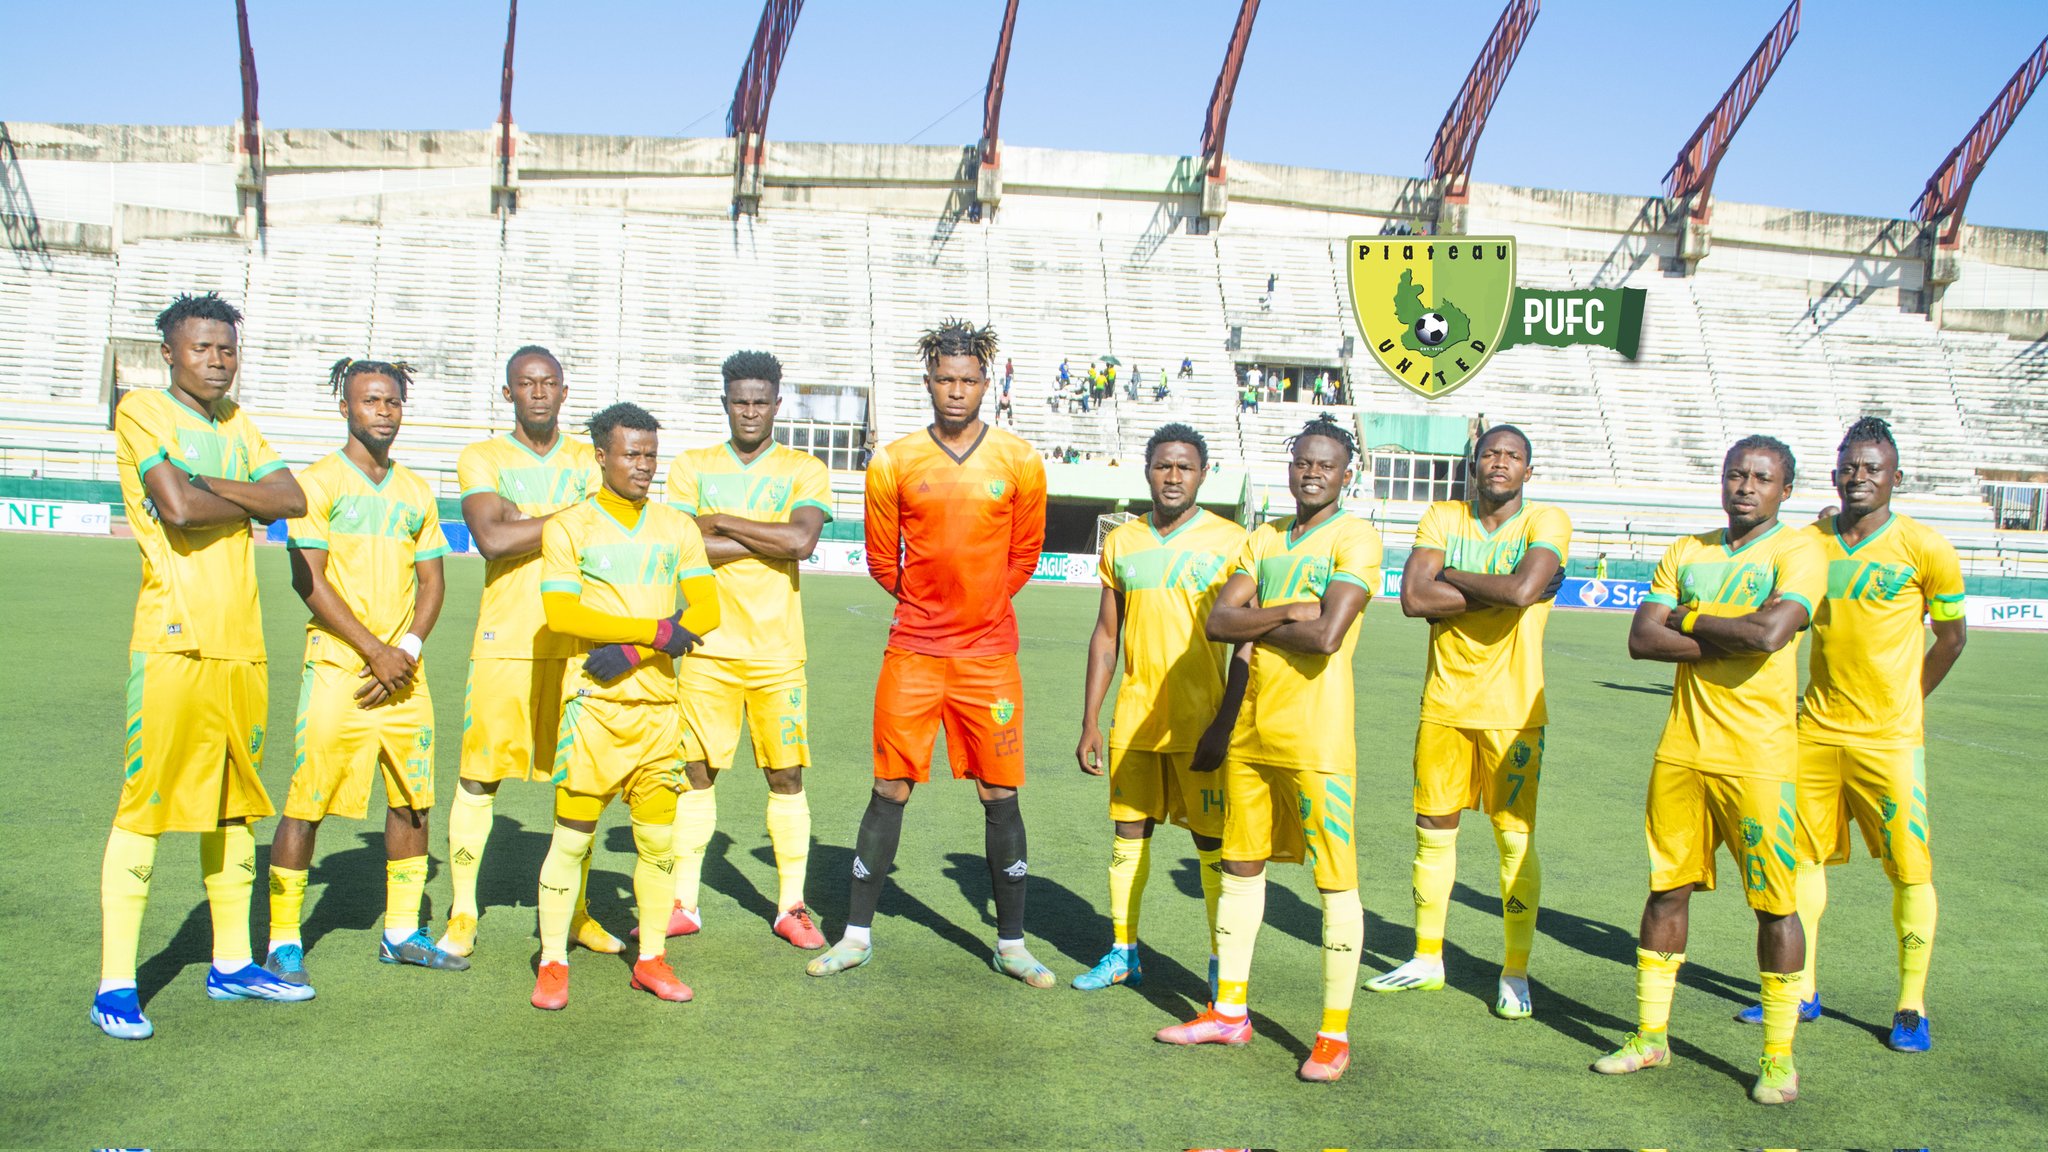 NPFL 24: Plateau United pick three points against Enyimba Intl. FC to go third on the log